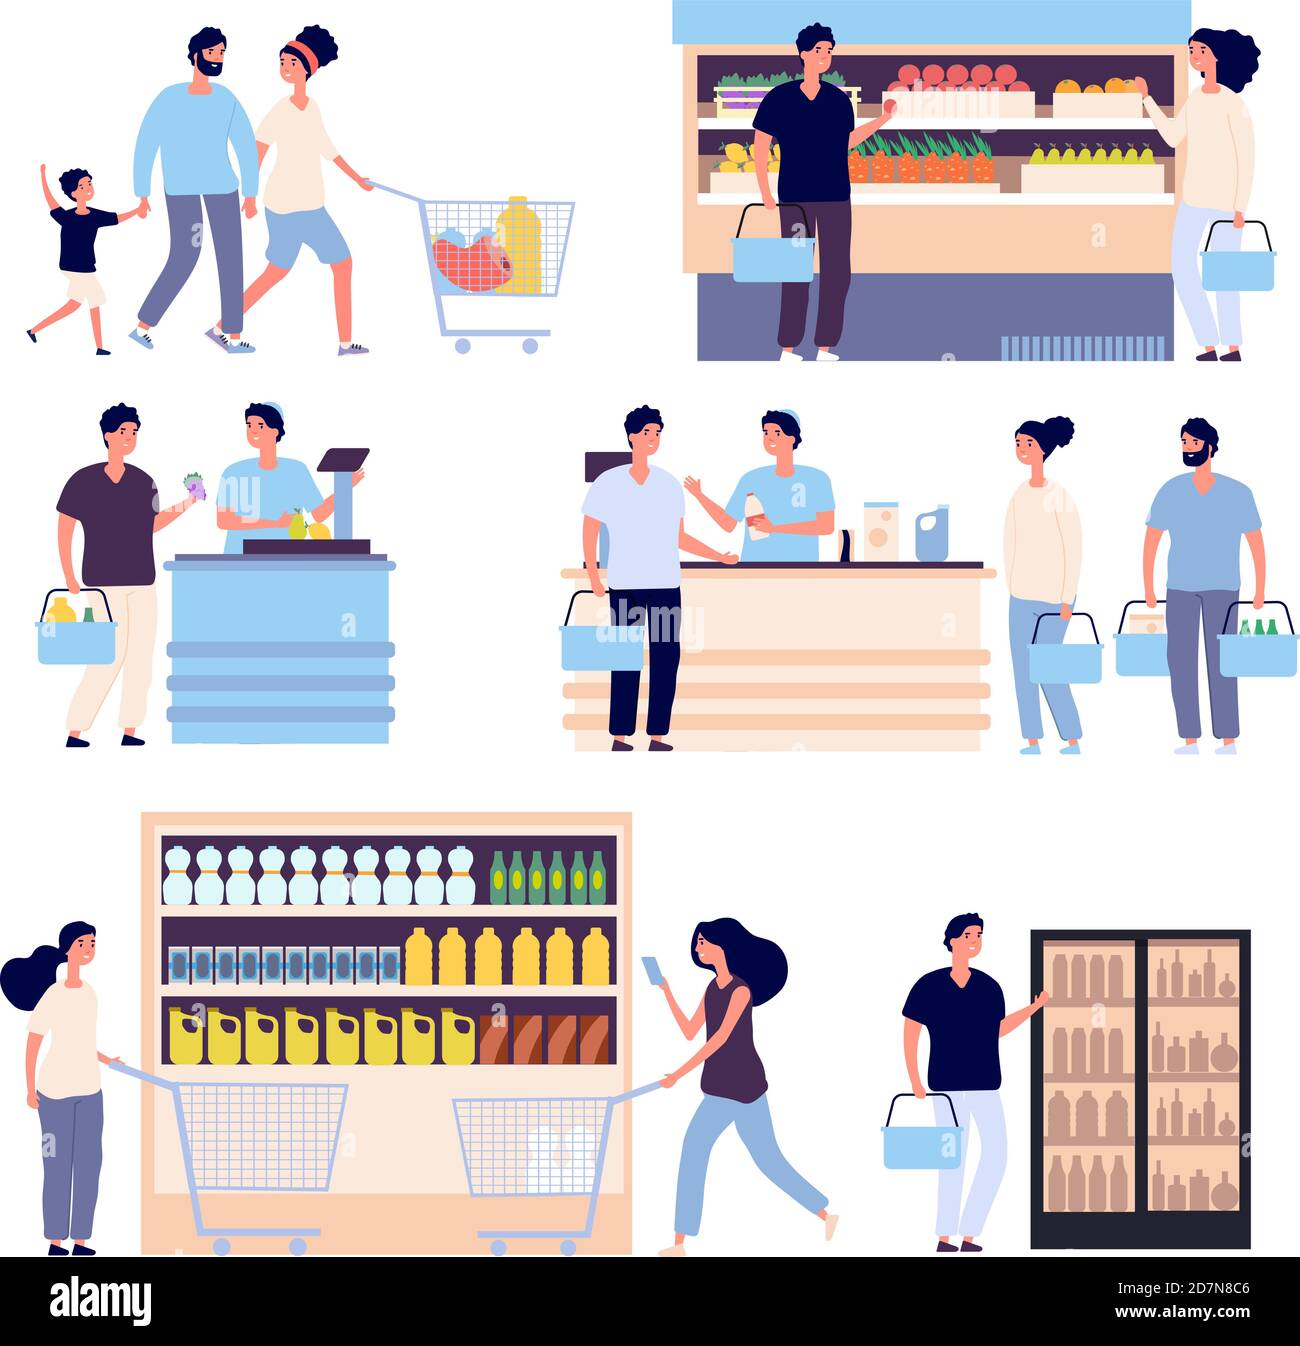 People in grocery store. Persons buying food in supermarket, shop customers woman, man with shopping cart. Isolated cartoon characters. Supermarket with customer, woman and man illustration Stock Vector